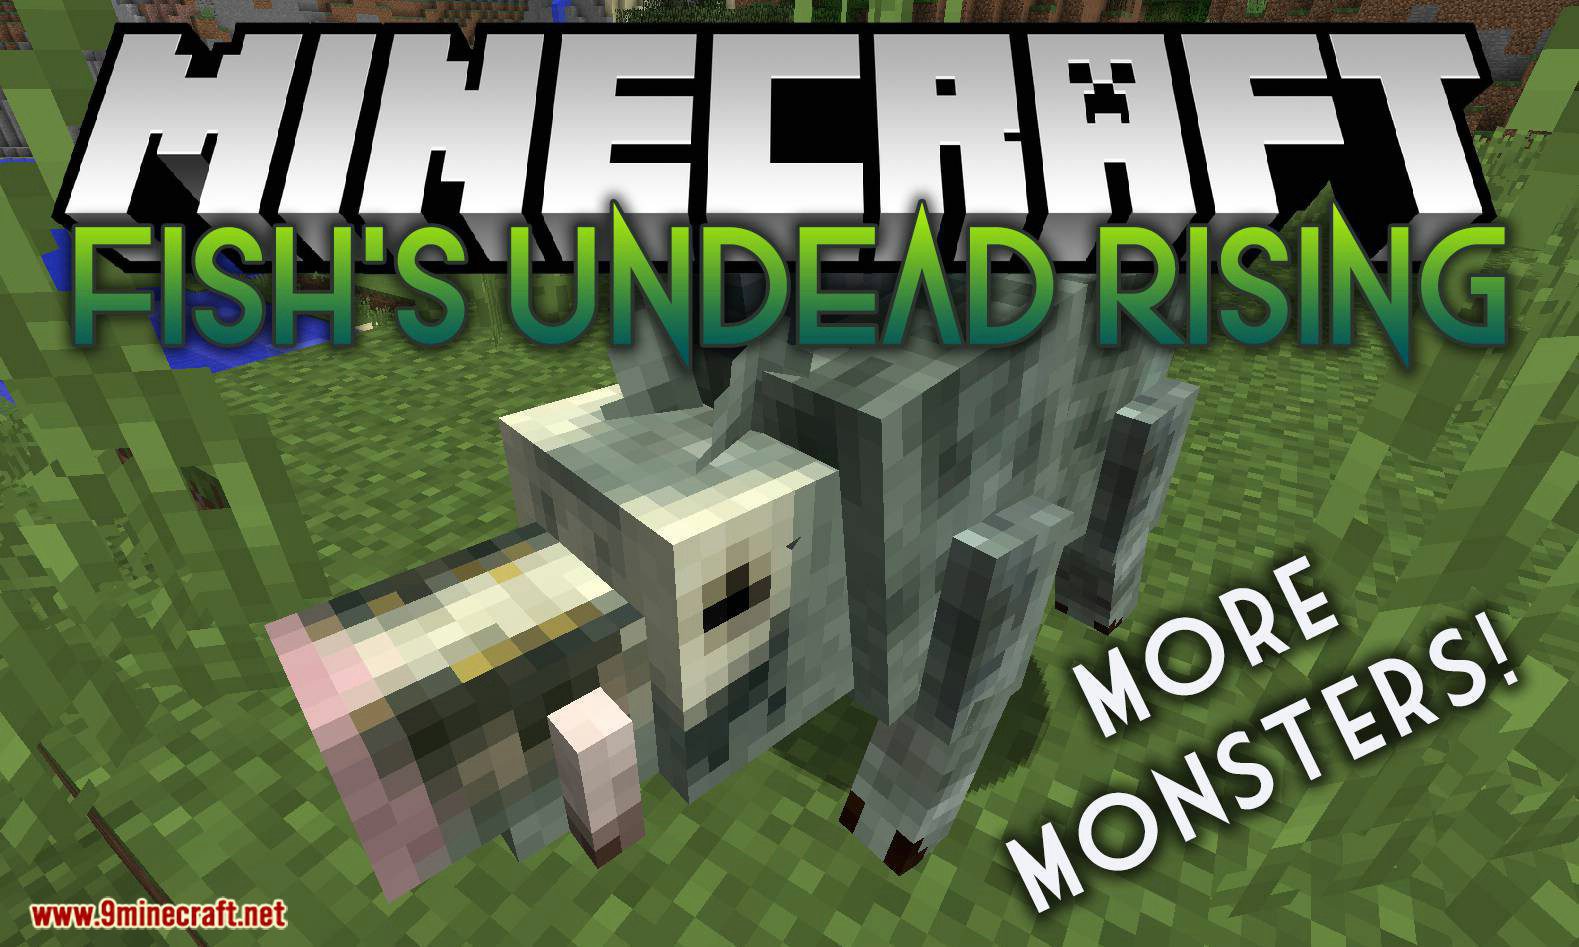 Fish_s Undead Rising mod for minecraft logo